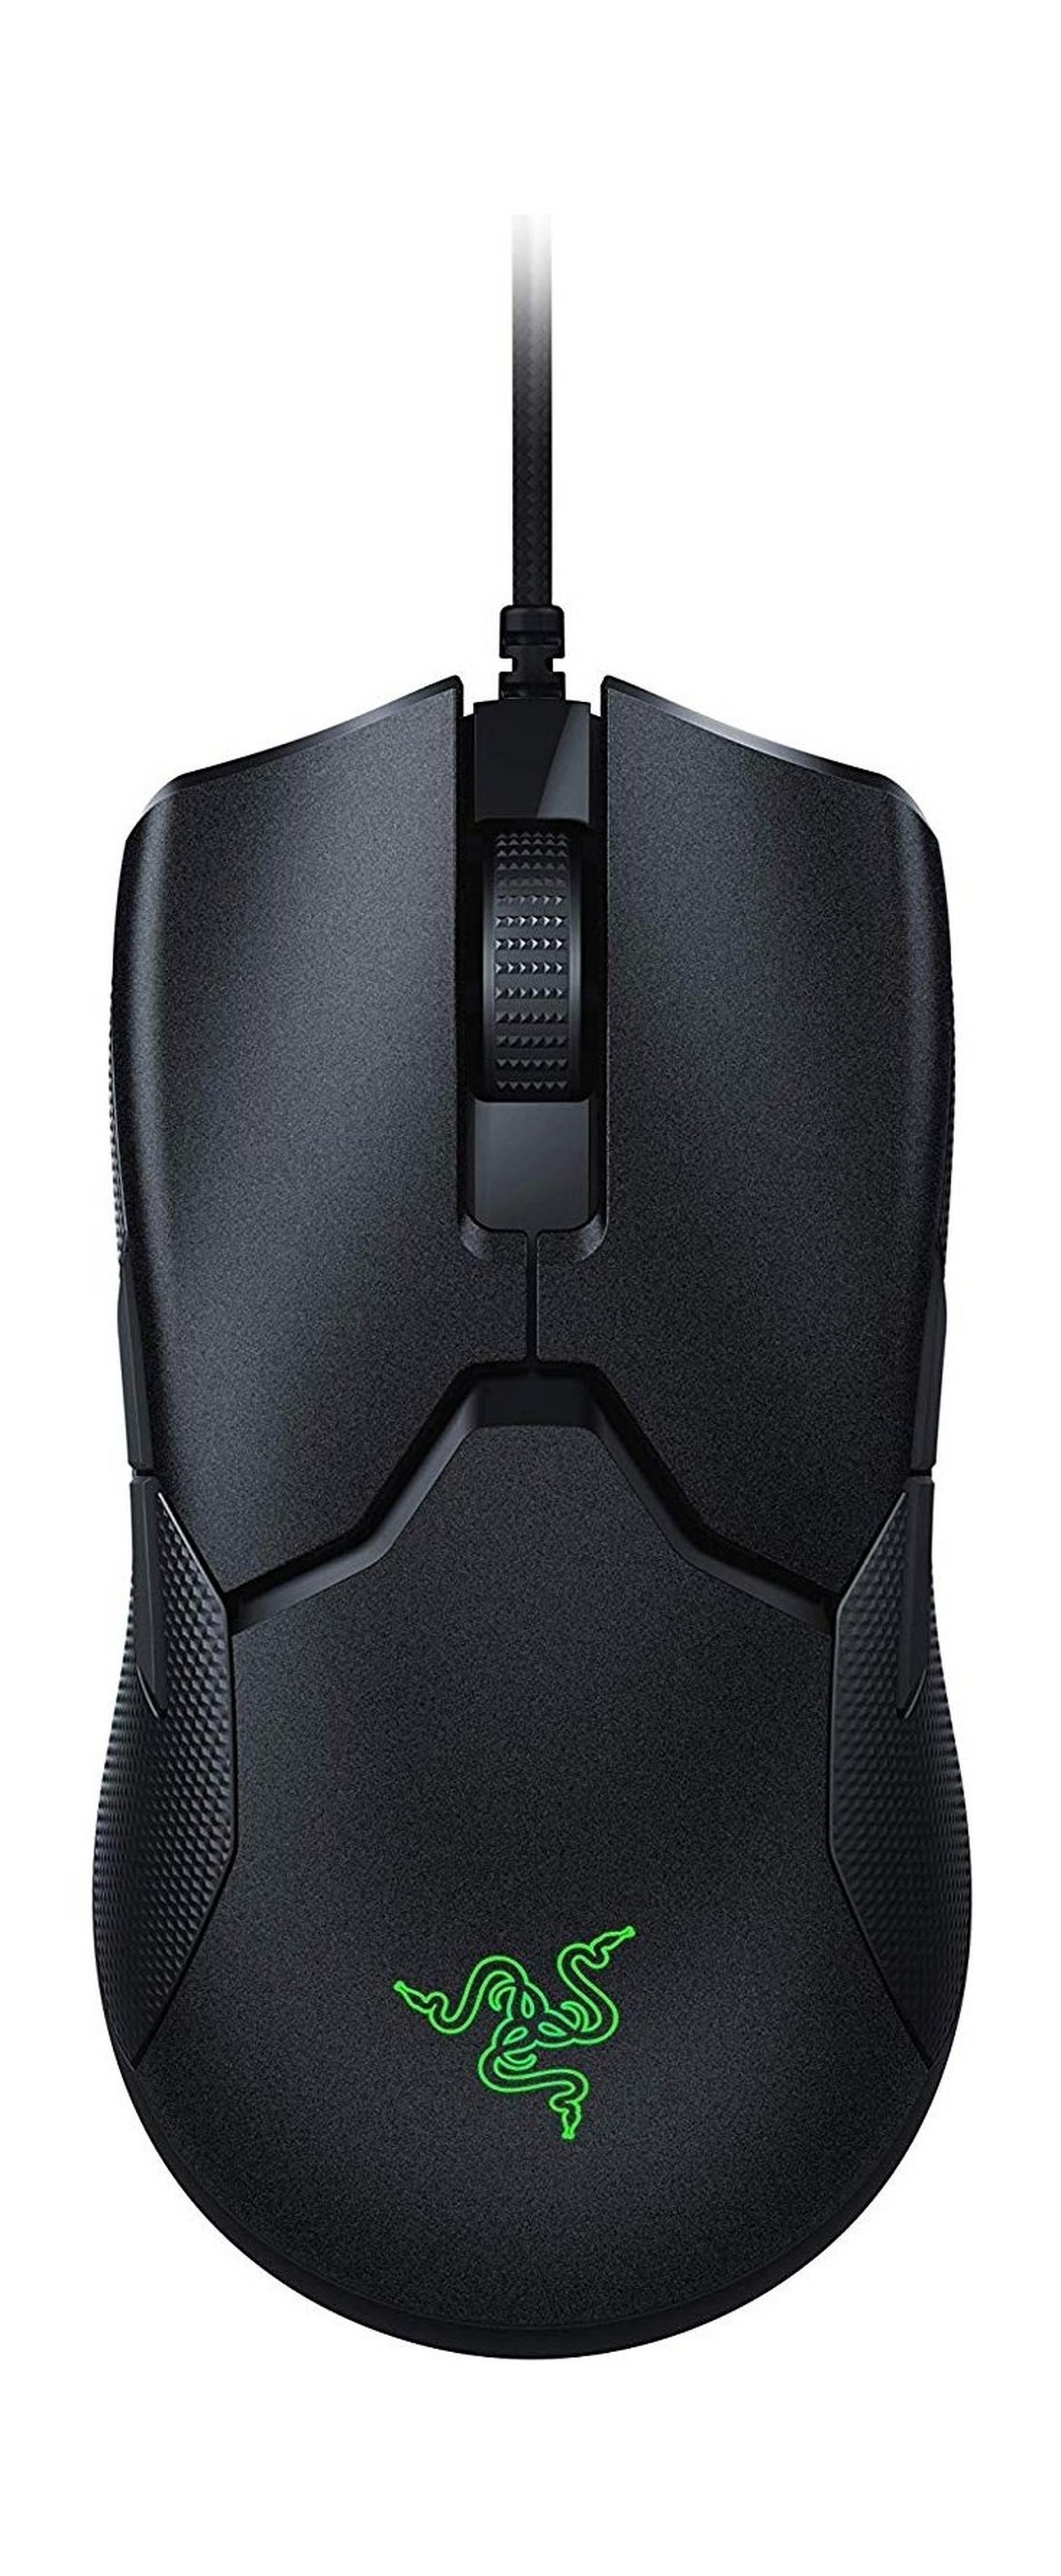 Razer Viper Ultralight Ambidextrous Wired Gaming Mouse - Black